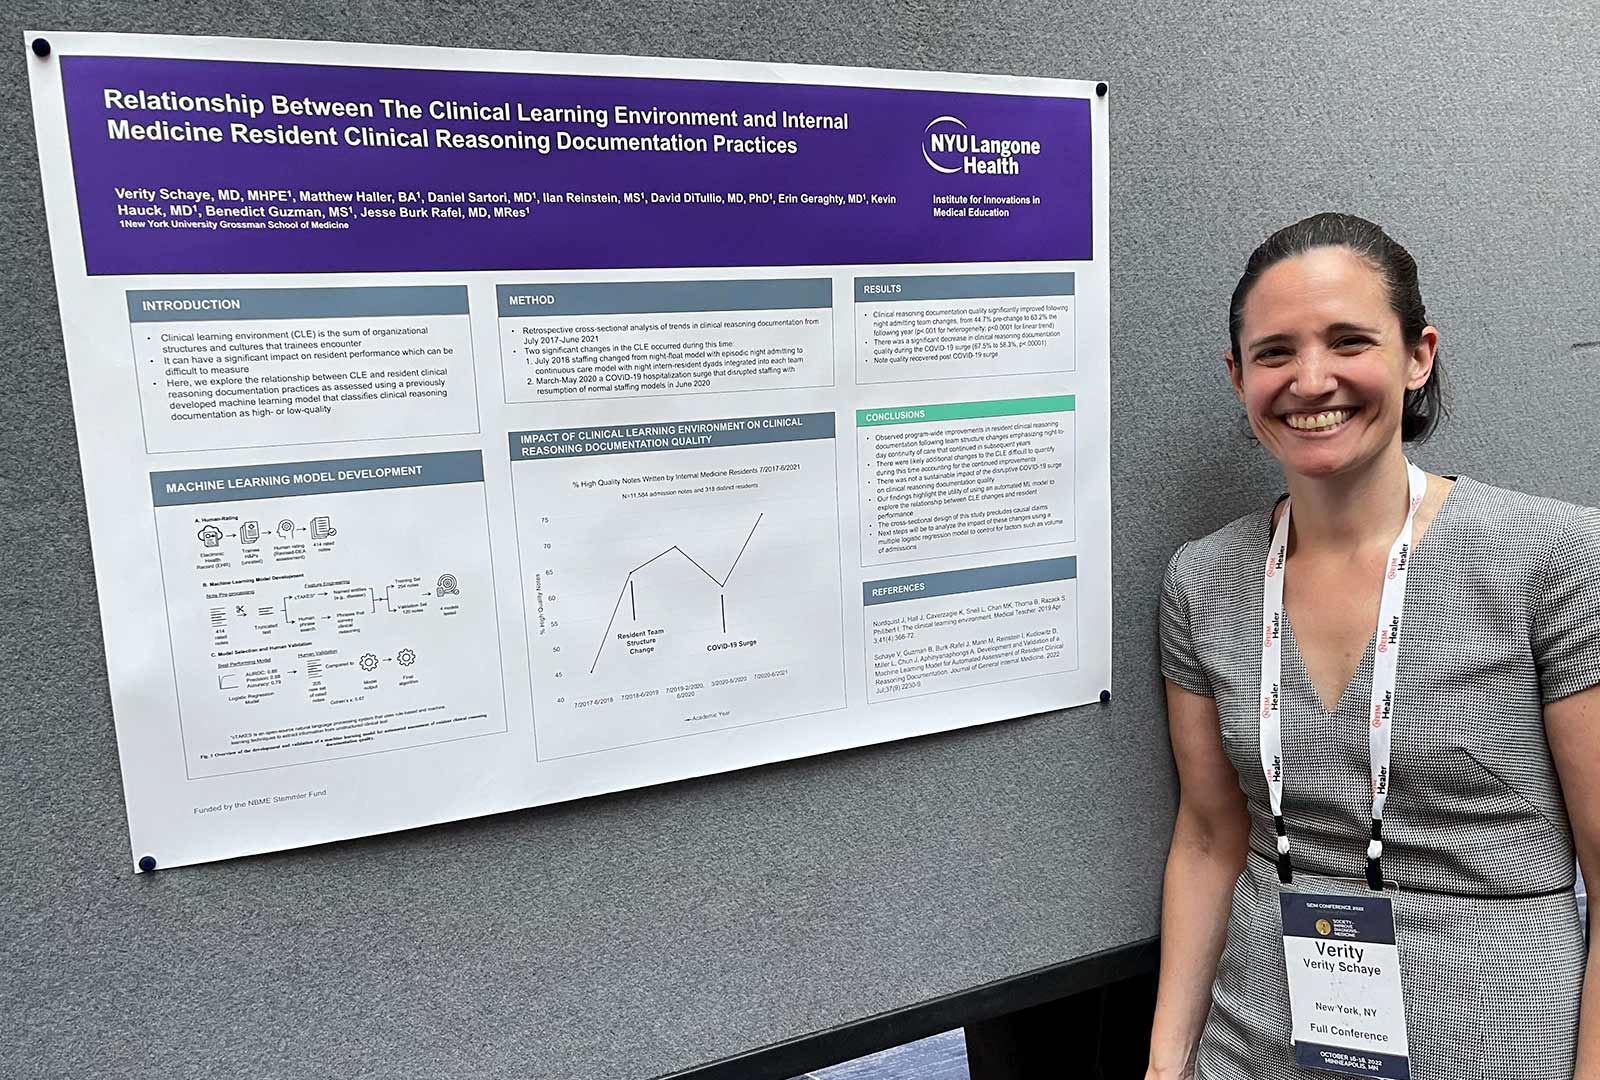 Dr. Verity Schaye Presenting a Conference Poster